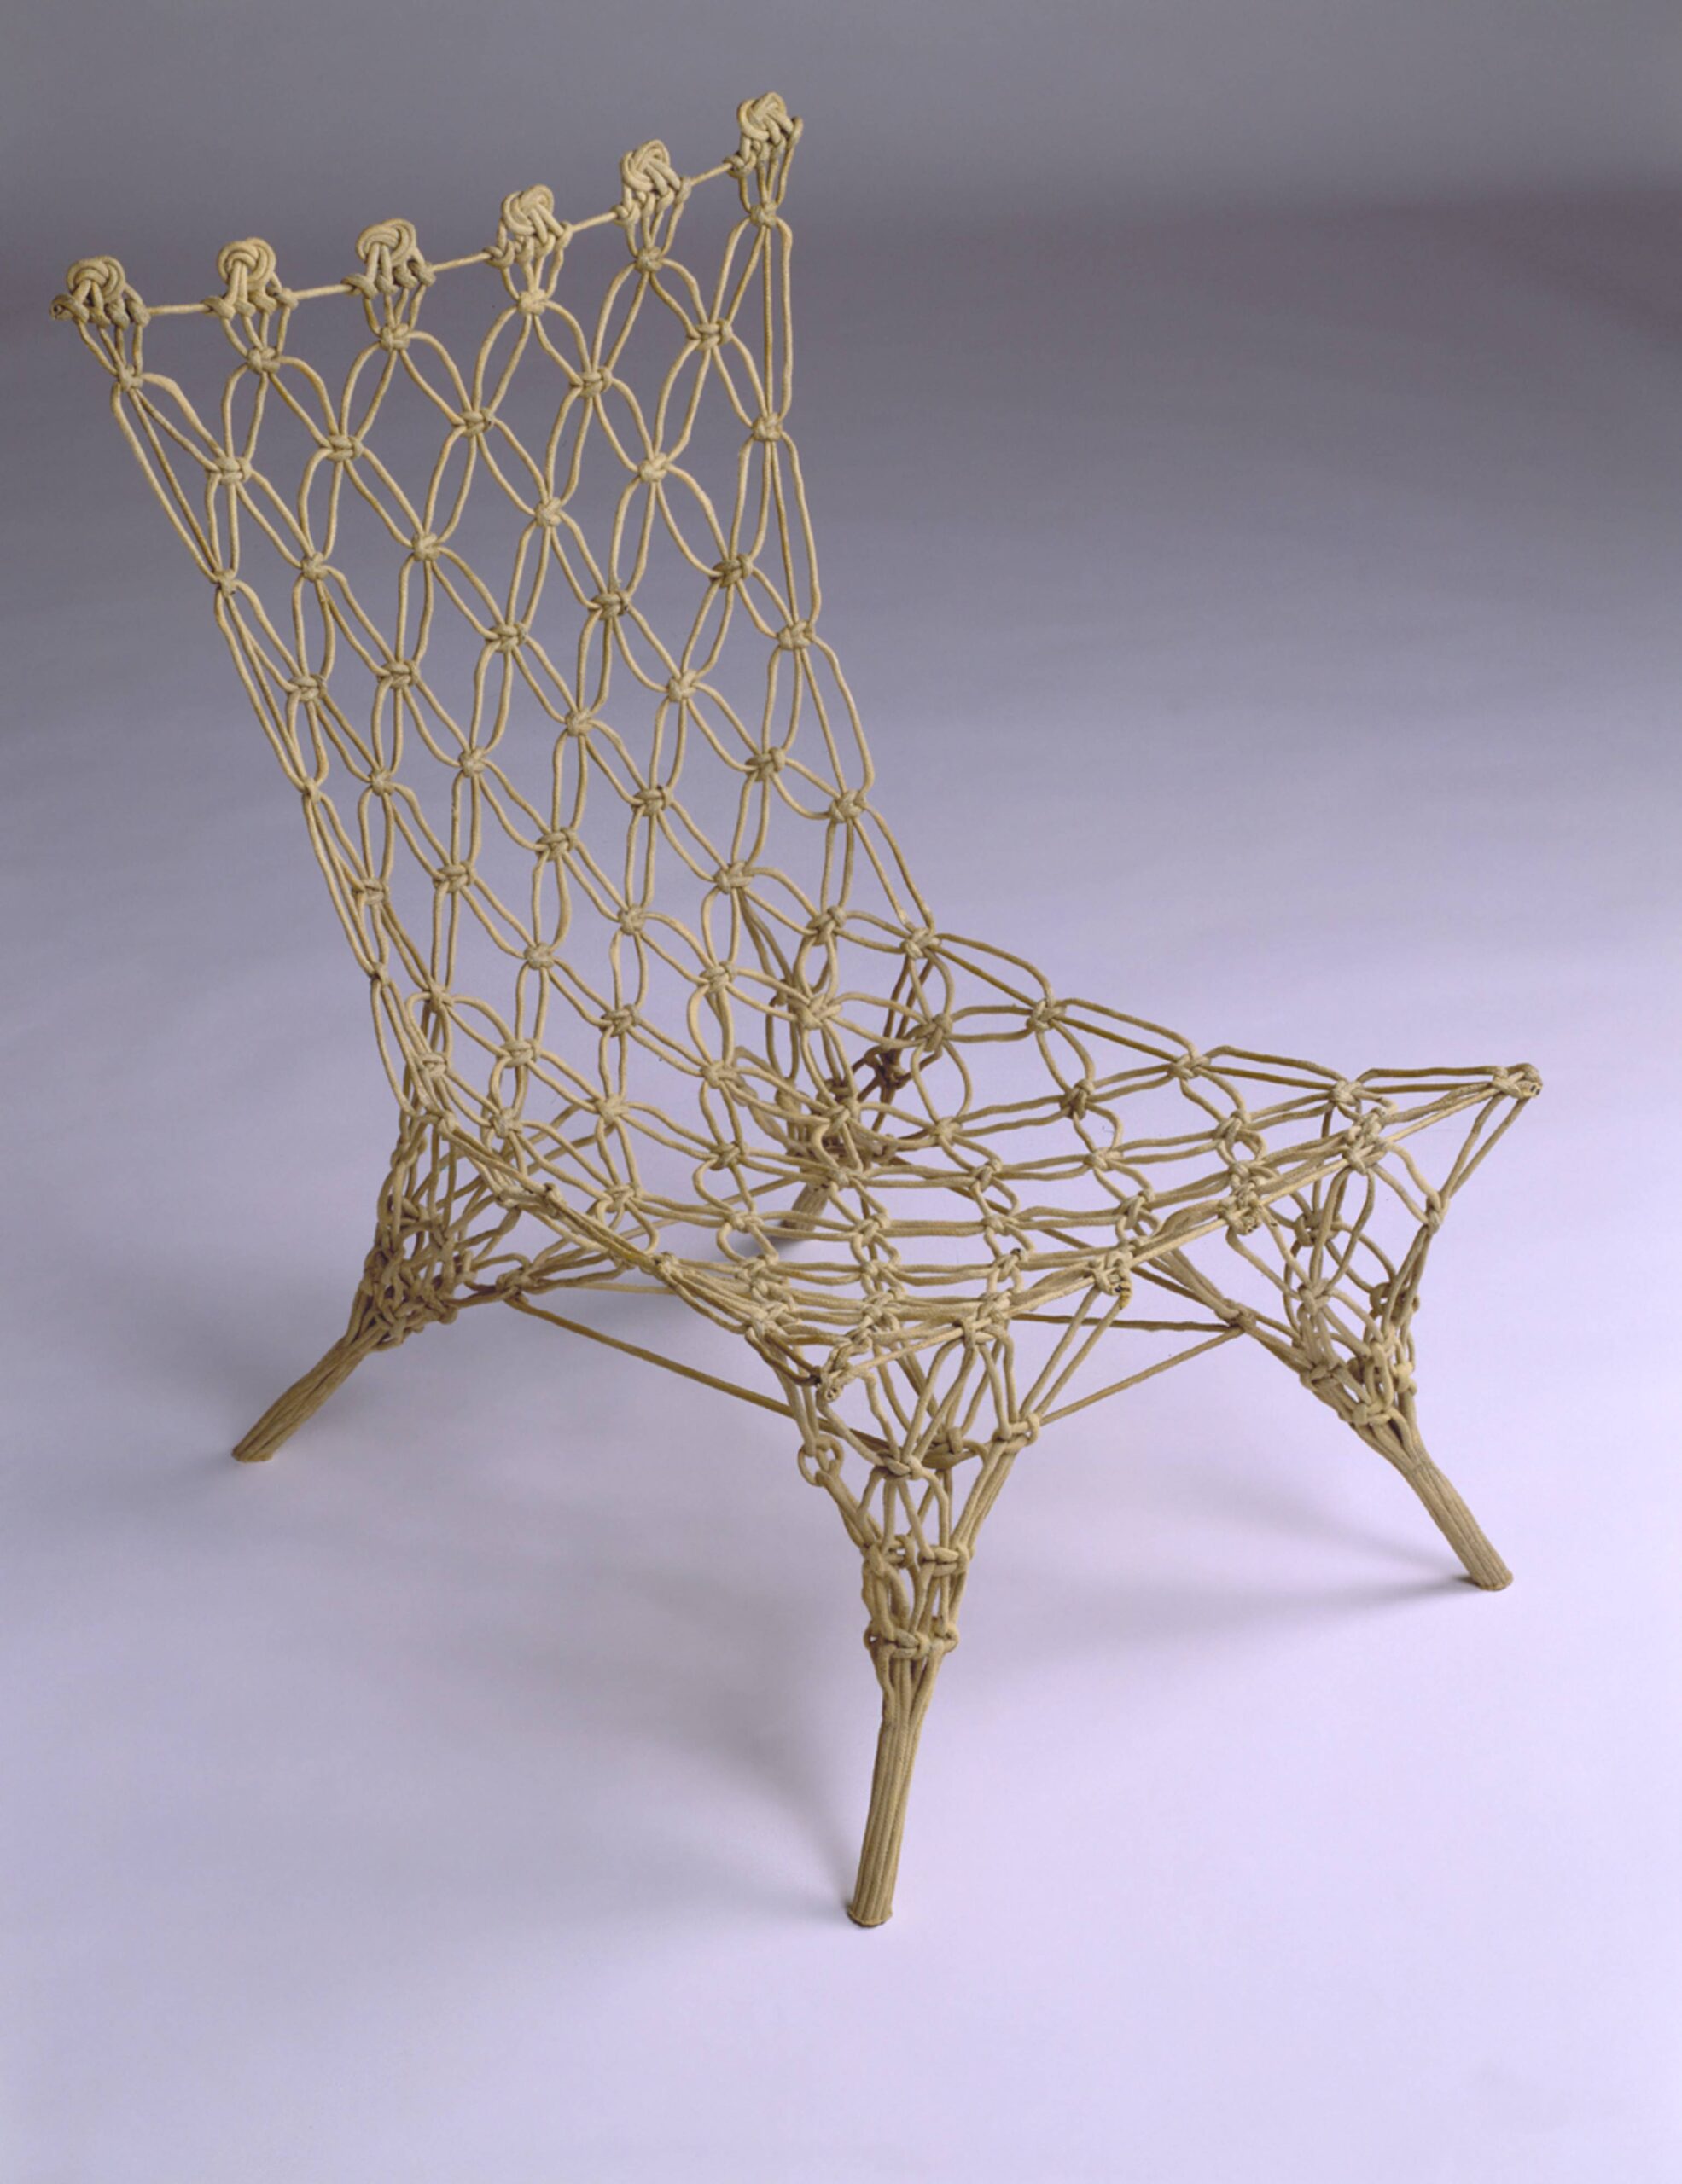 Knotted Chair” [1995] by Marcel Wanders and “Chest of drawers” [1991]